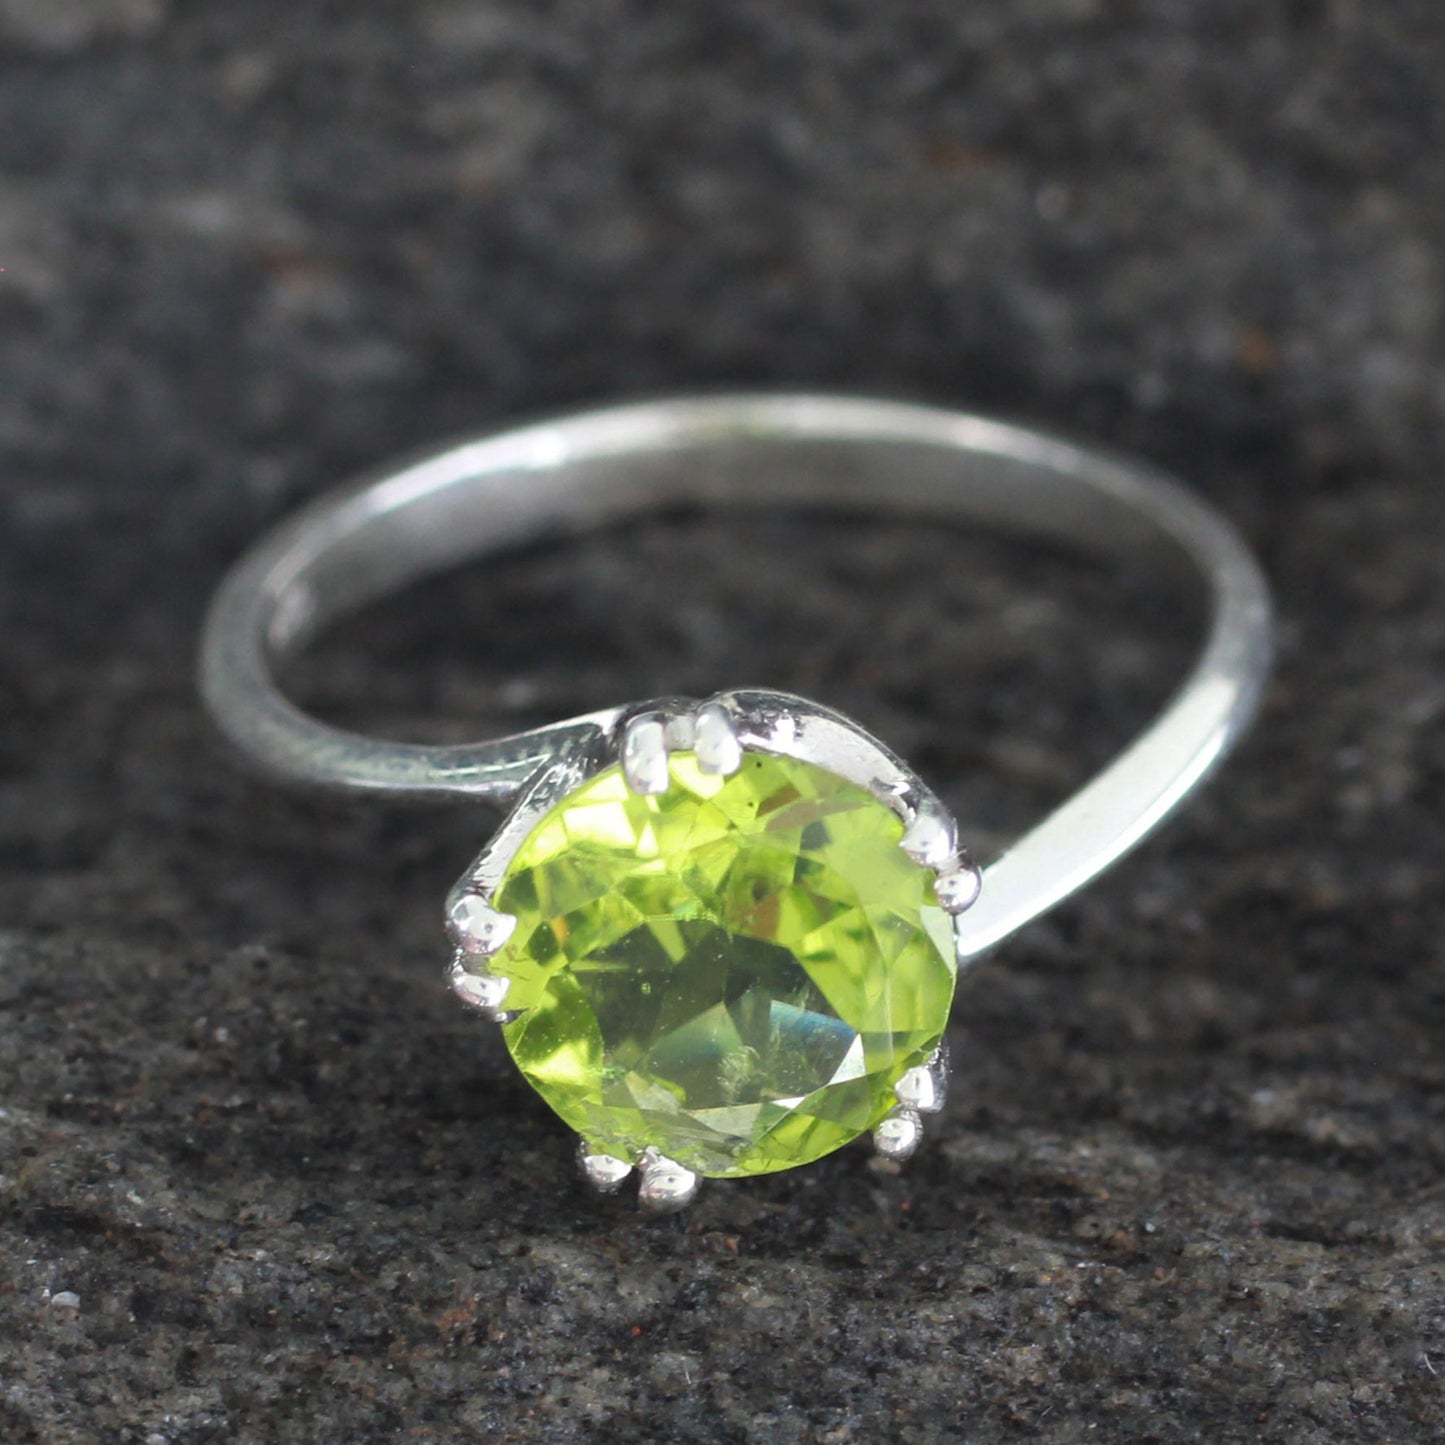 Delhi Crown Sterling Silver and Peridot Ring Hand Made Modern Jewelry